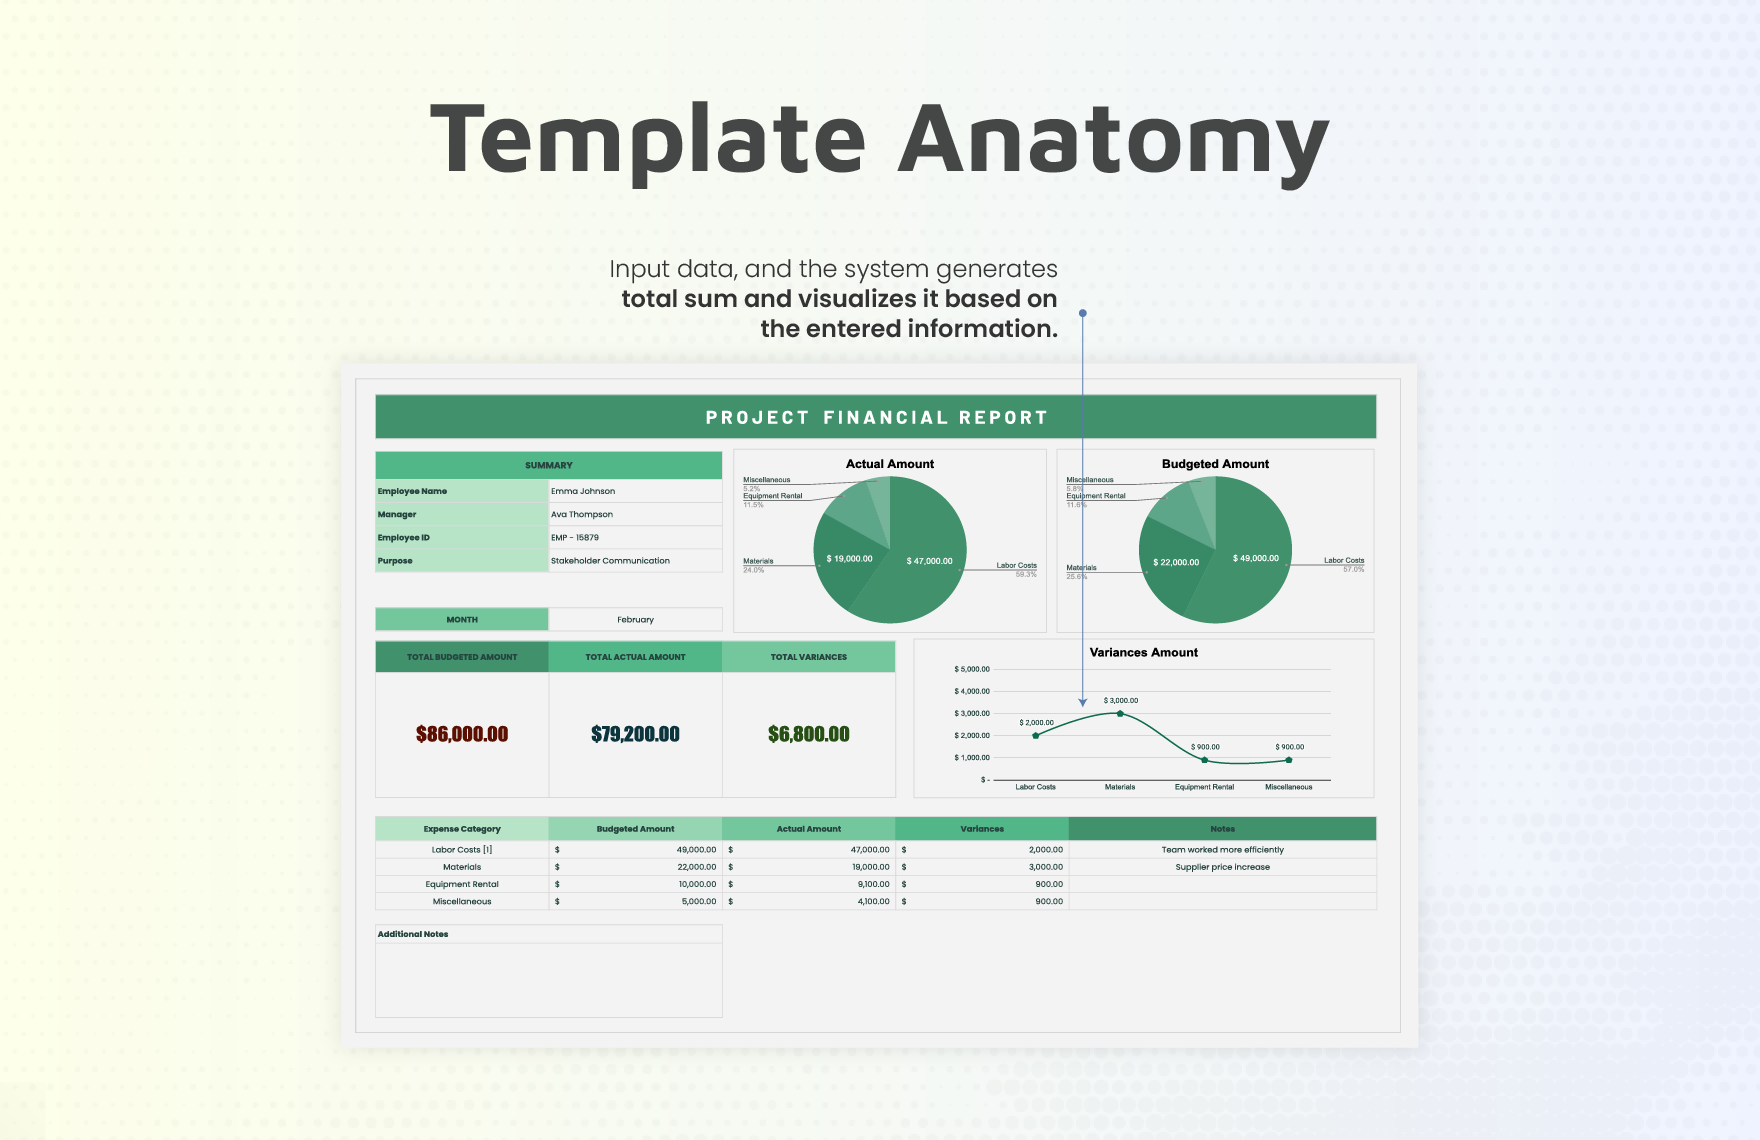 Project Financial Report Template